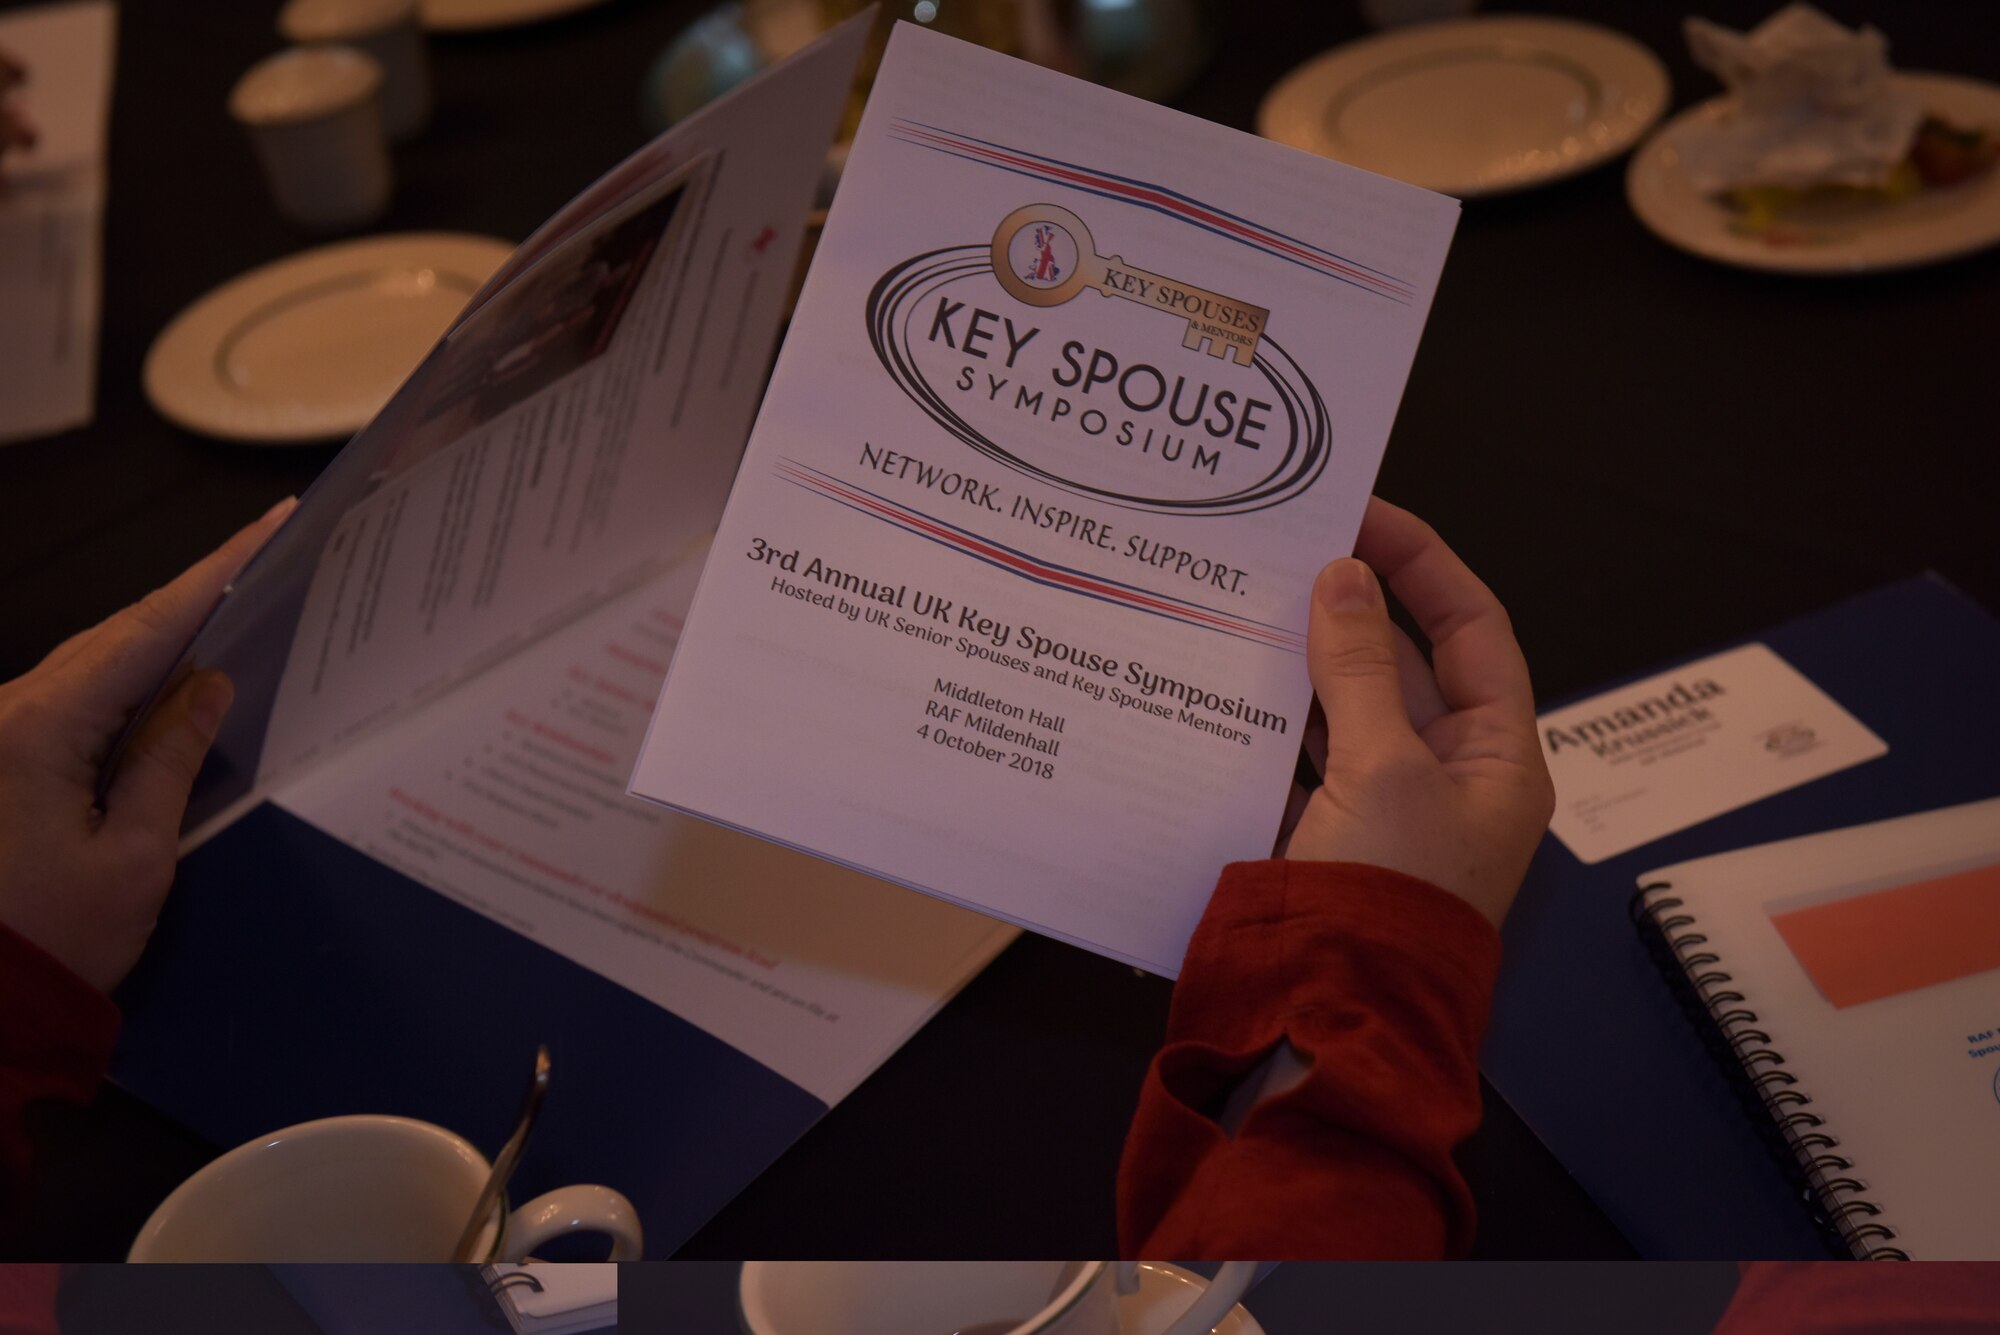 Leah Weme, 100th Maintenance Squadron Key Spouse reads over a Key Spouse Symposium pamphlet at RAF Mildenhall, England, Oct. 4, 2018. The Key Spouses organization is an opportunity for leadership and spouses to bridge the gap between dependents and leadership, as well Airmen as. (U.S. Air Force photo by Airman 1st Class Alexandria Lee)